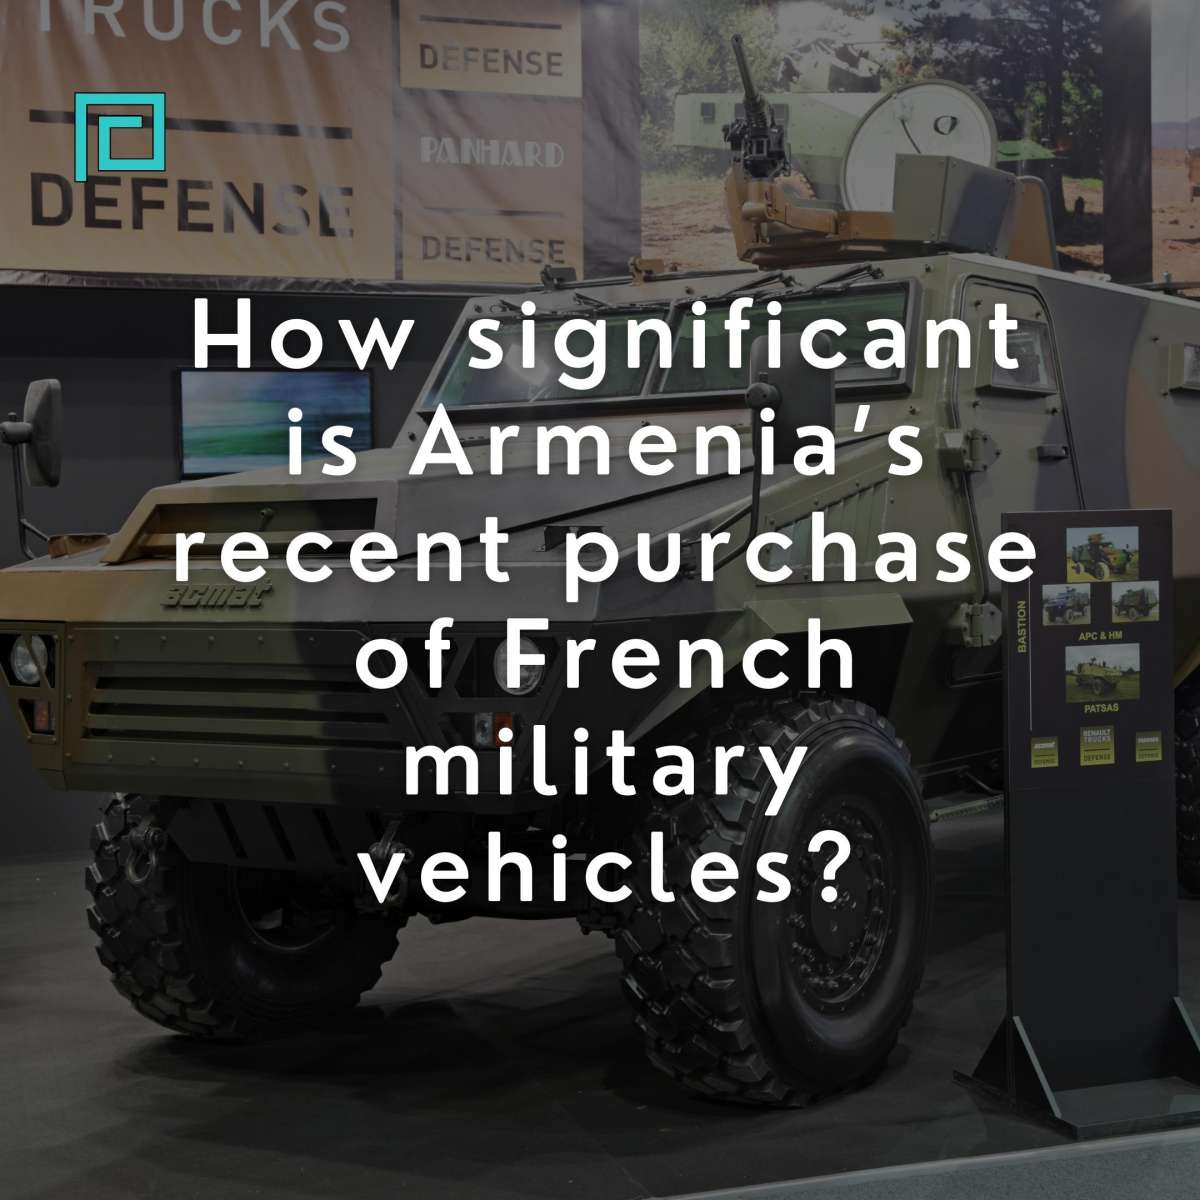 How significant is Armenia’s recent purchase of French military vehicles?